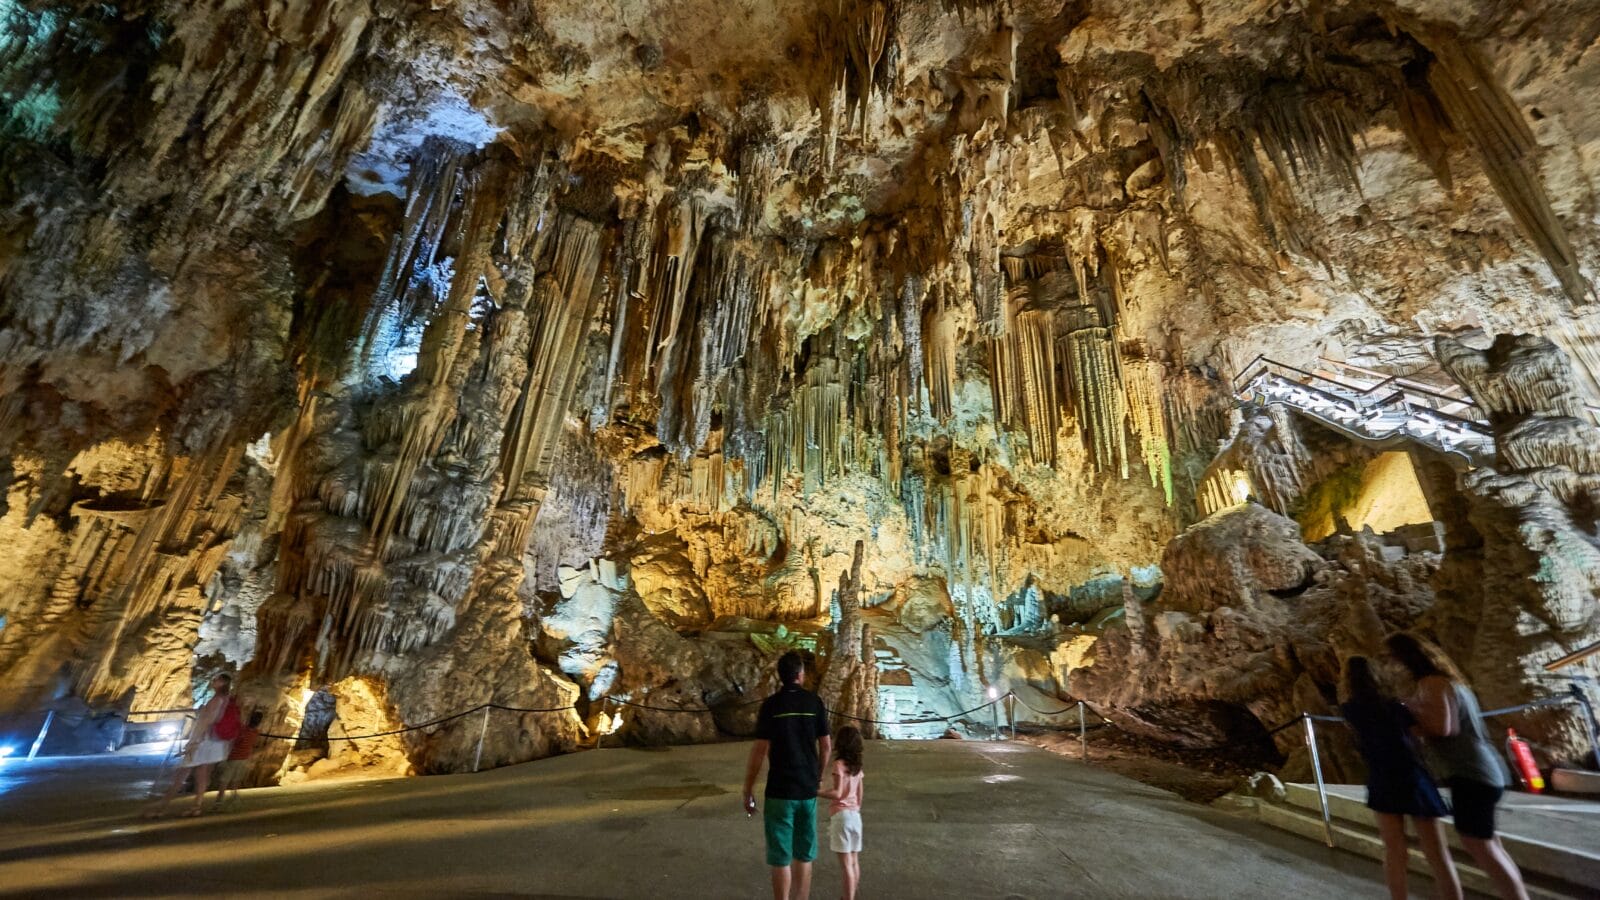 <p>The Nerja Caves are part of a cave network stretching over three miles. The caves remain an integral part of Spain’s tourism. They are famous for the theatrical chamber, which resembles an amphitheater and is home to out-of-this-world concerts and shows.</p><p>The caves carved into the land of Malaga province are also famed for their dramatic stalagmites, stalactites, and karst formations unique to this natural marvel.</p>